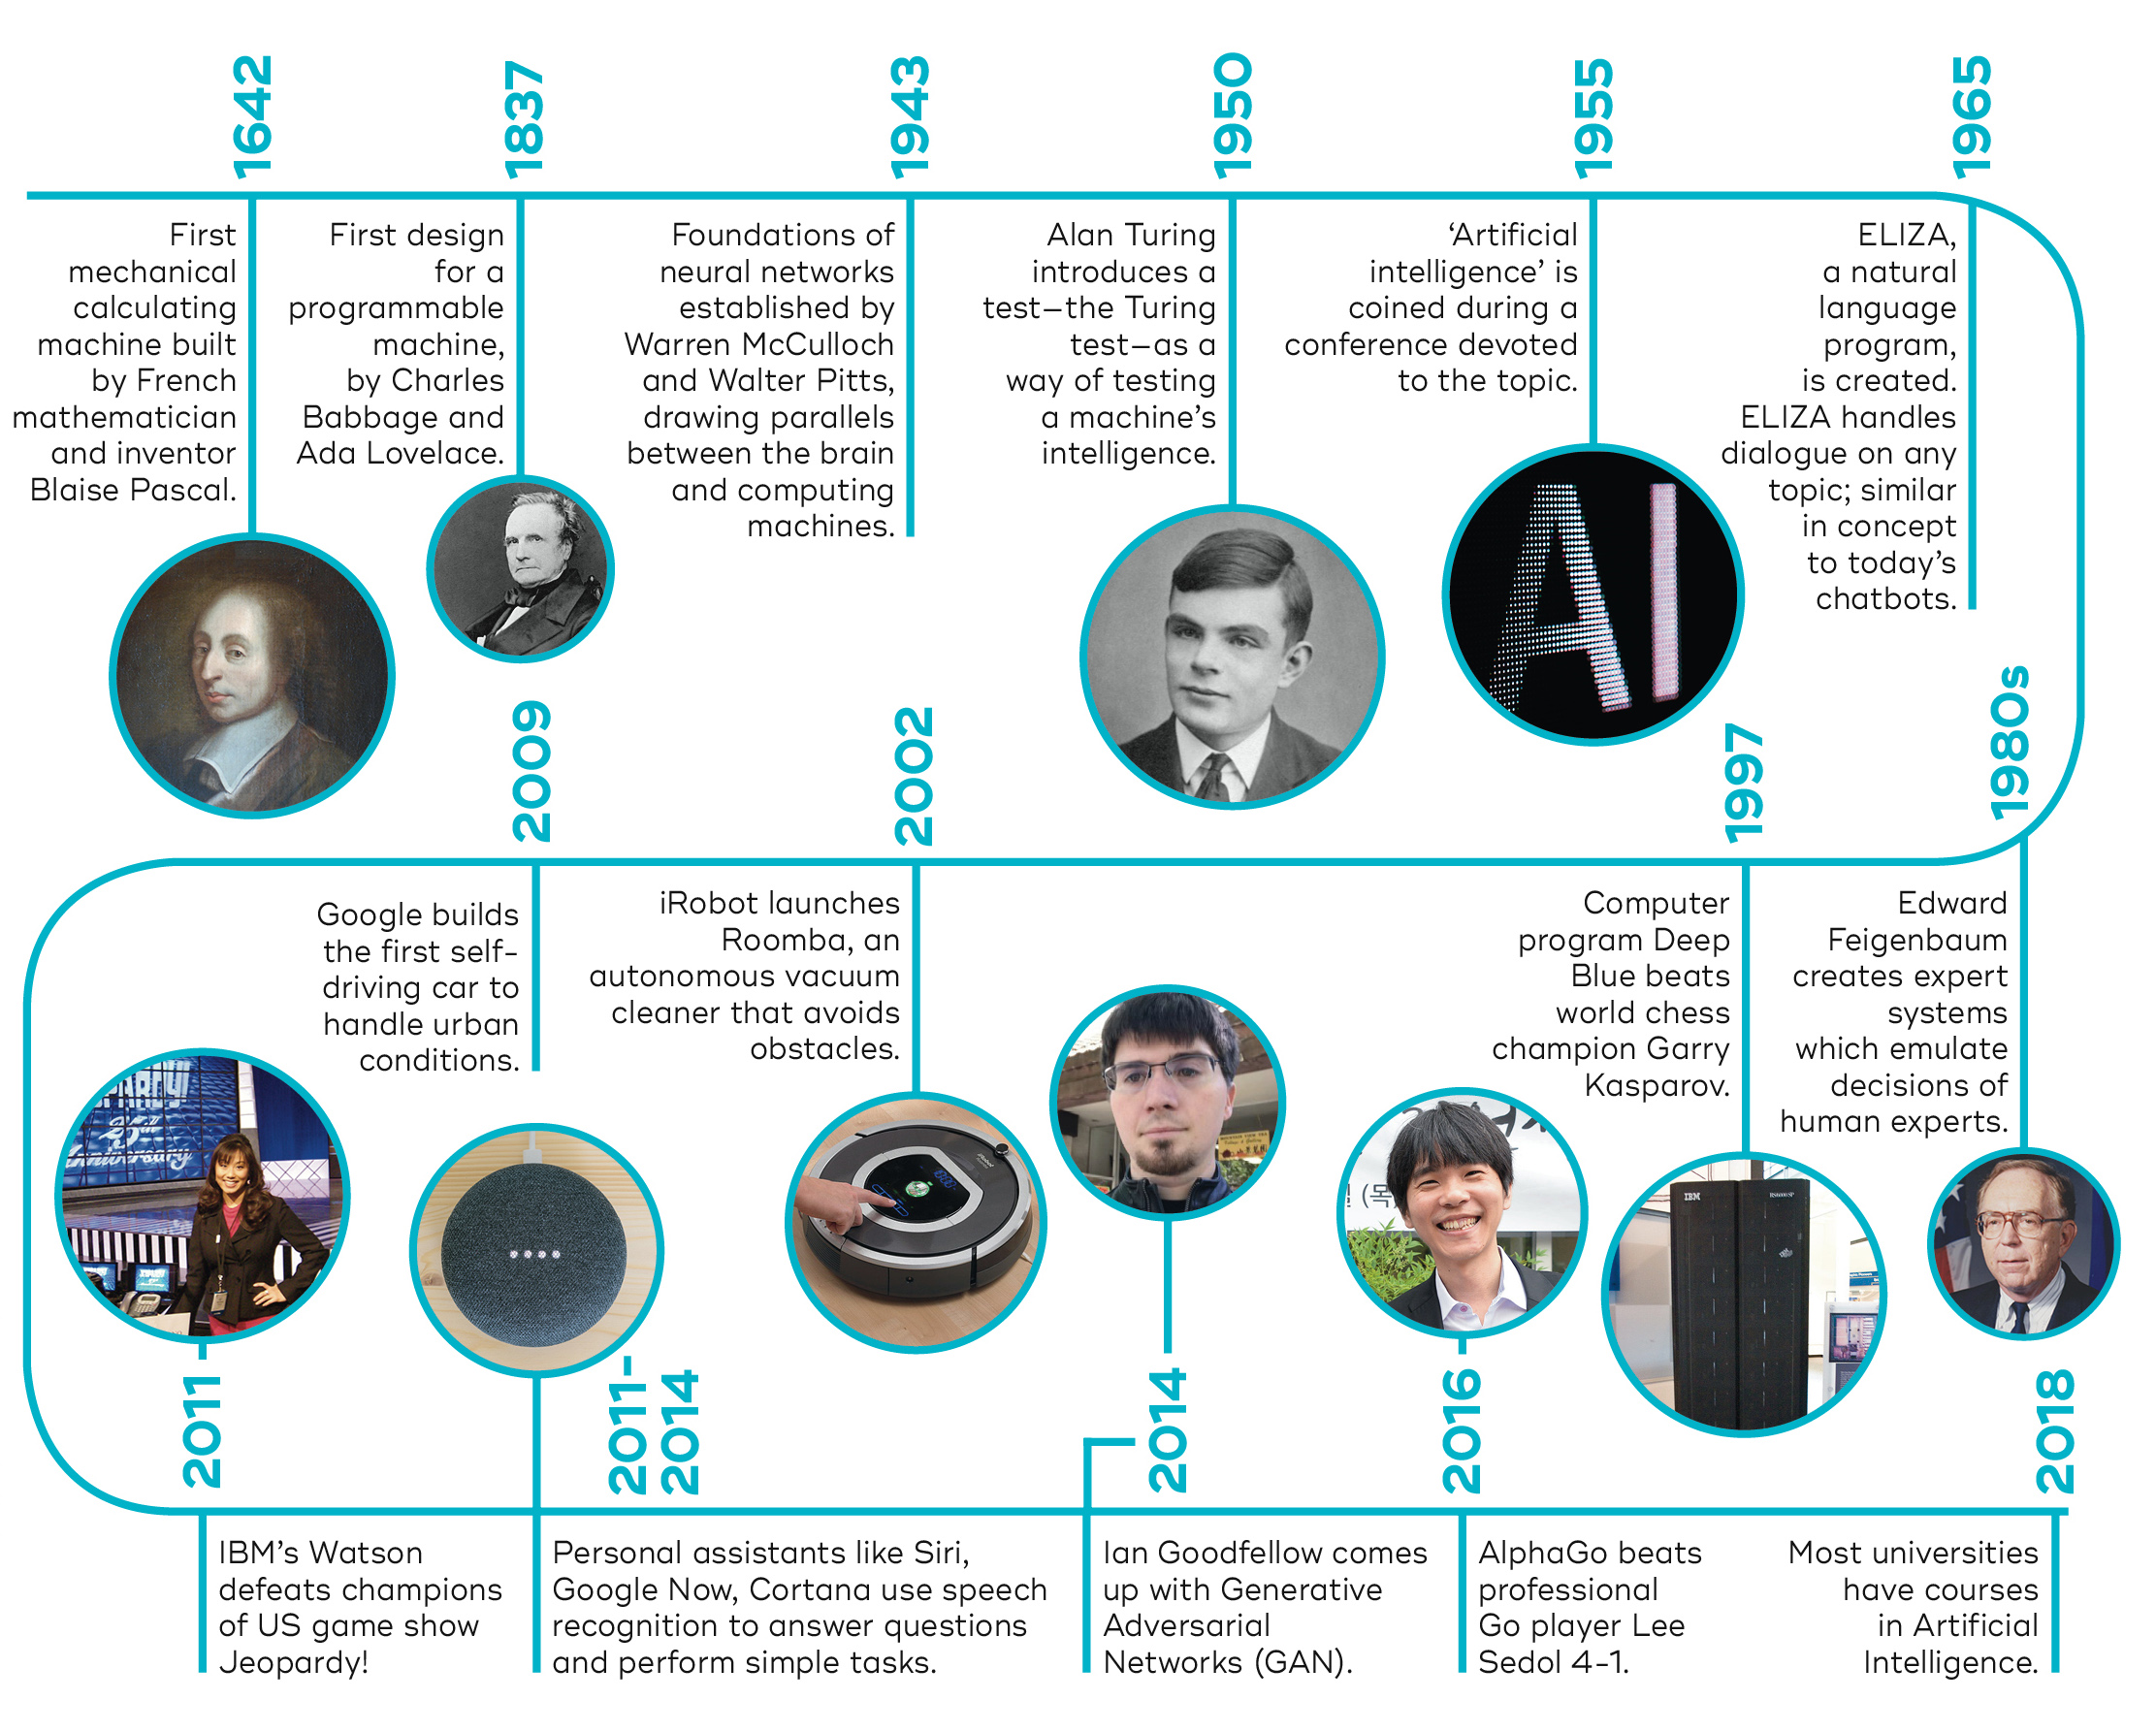 Timeline of Artificial Intelligence